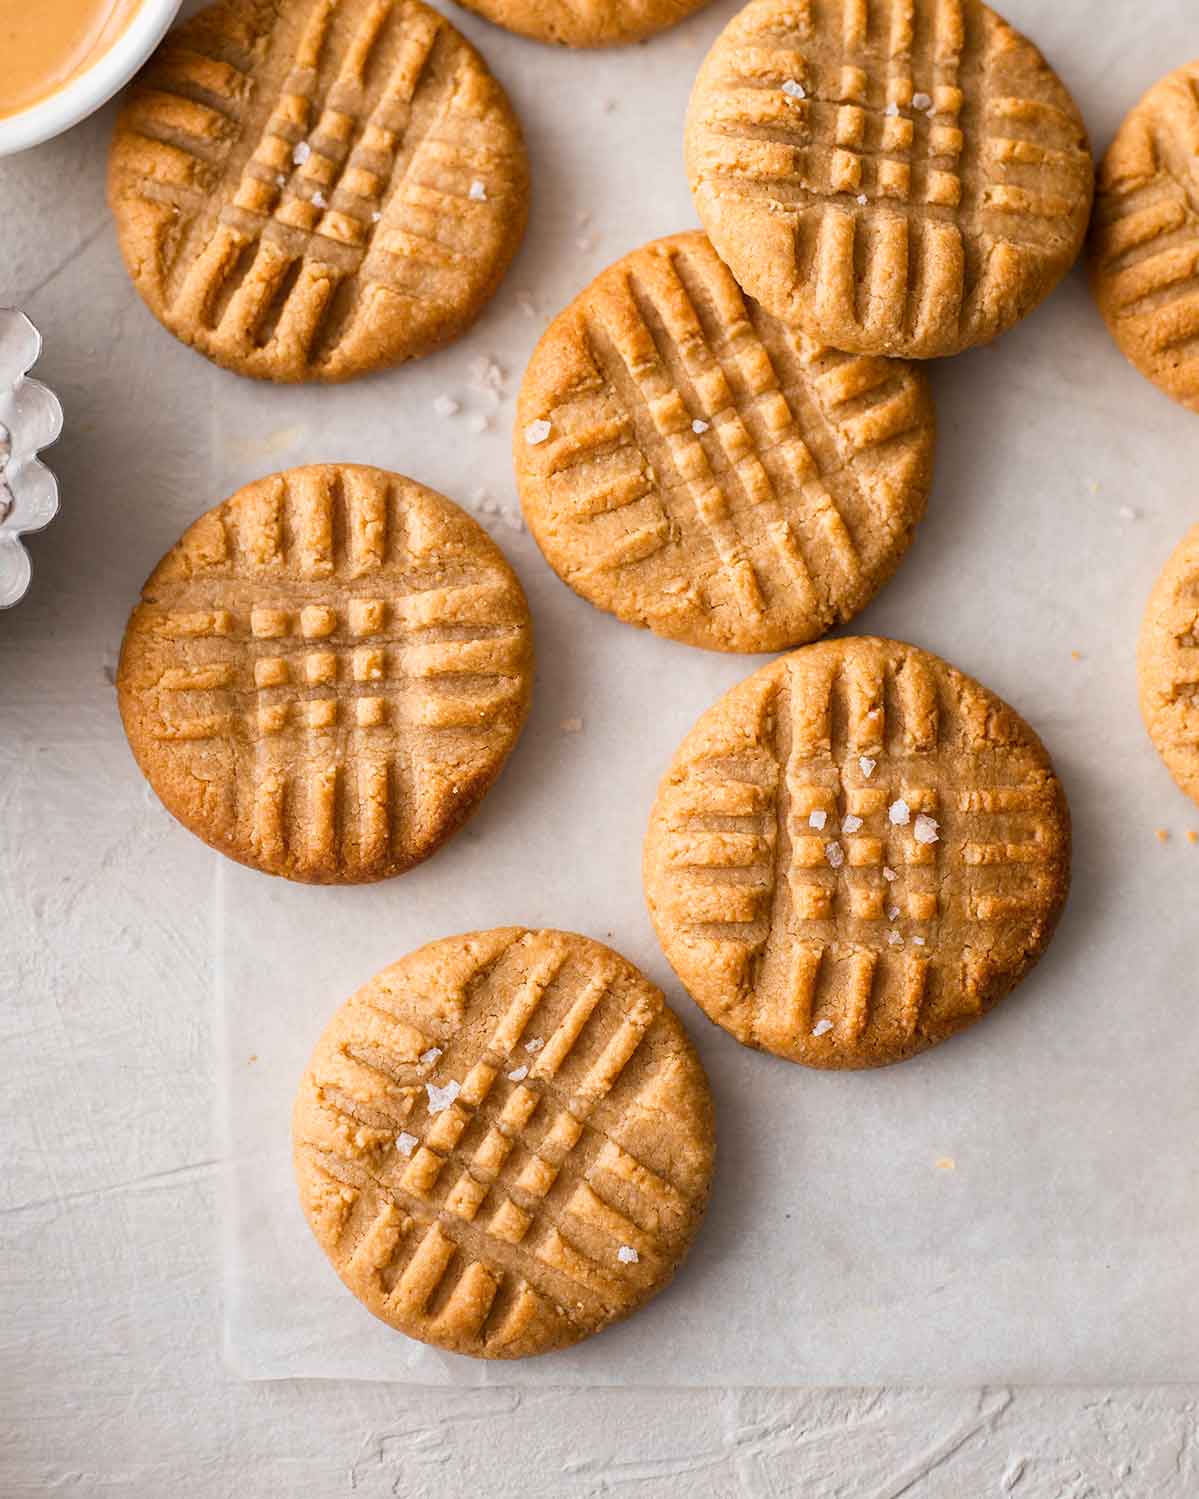 3 ingredient vegan peanut butter cookies with criss cross pattern and flaked salt on baking paper.